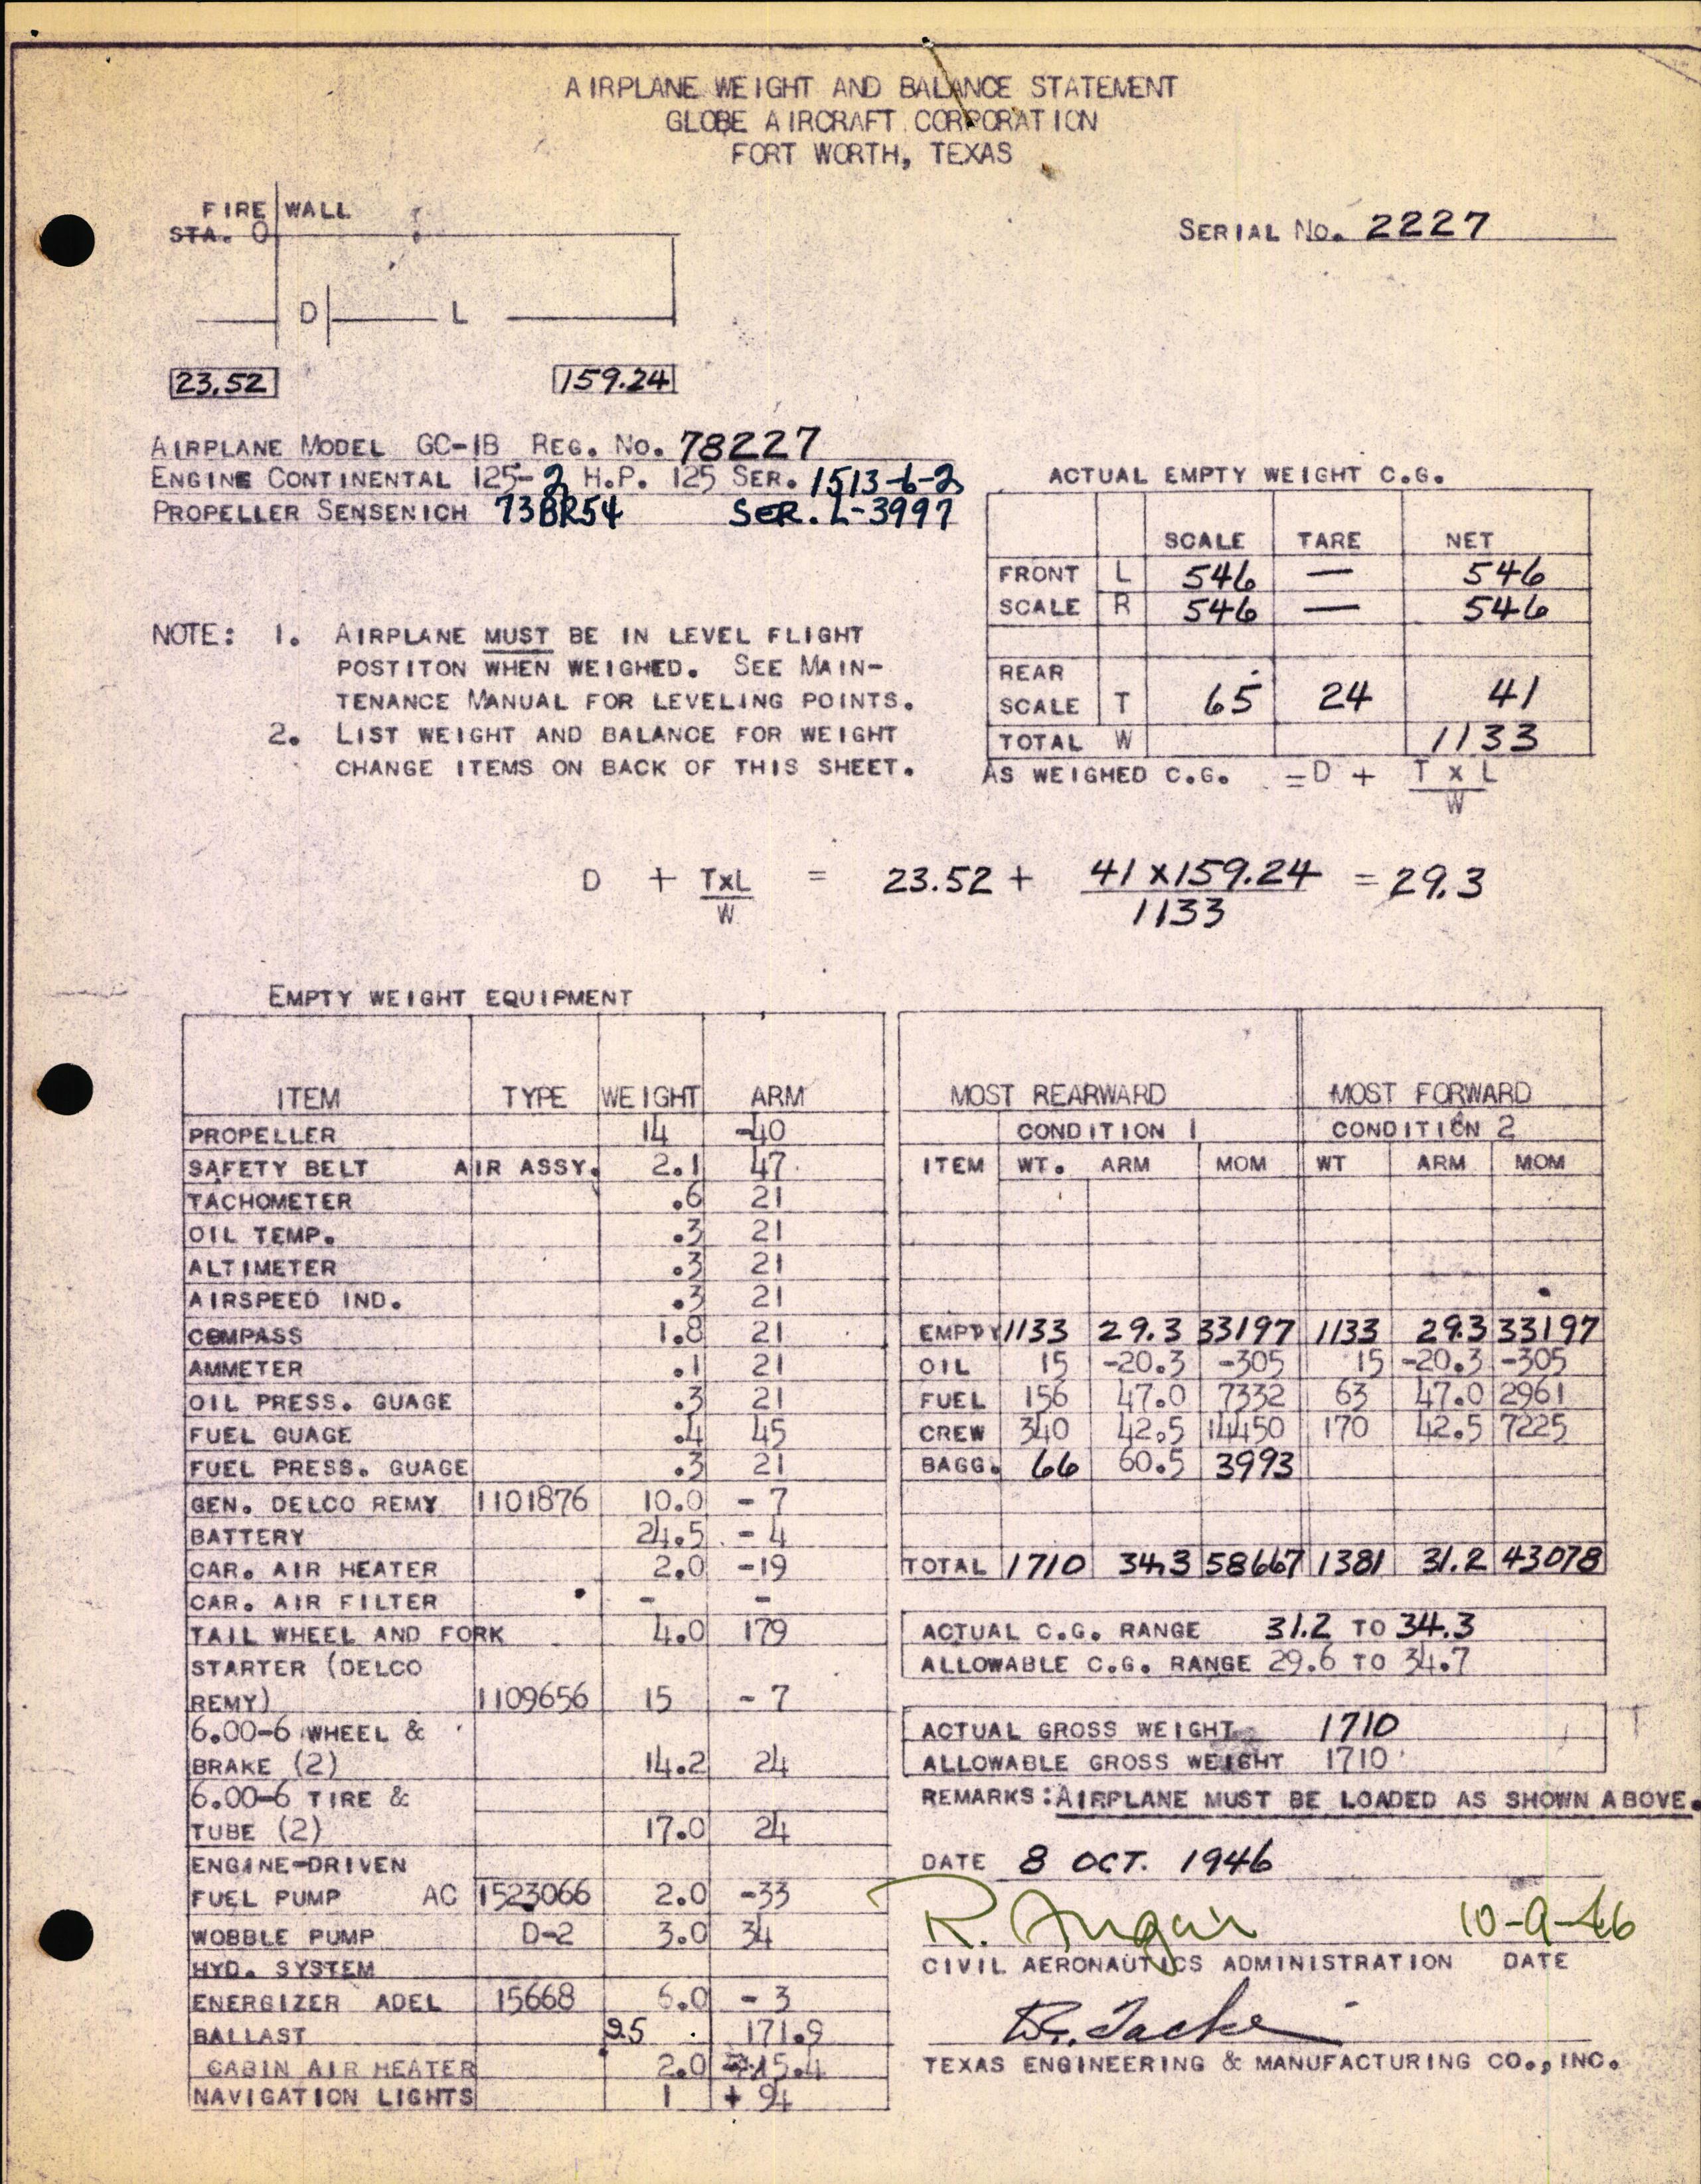 Sample page 1 from AirCorps Library document: Technical Information for Serial Number 2227